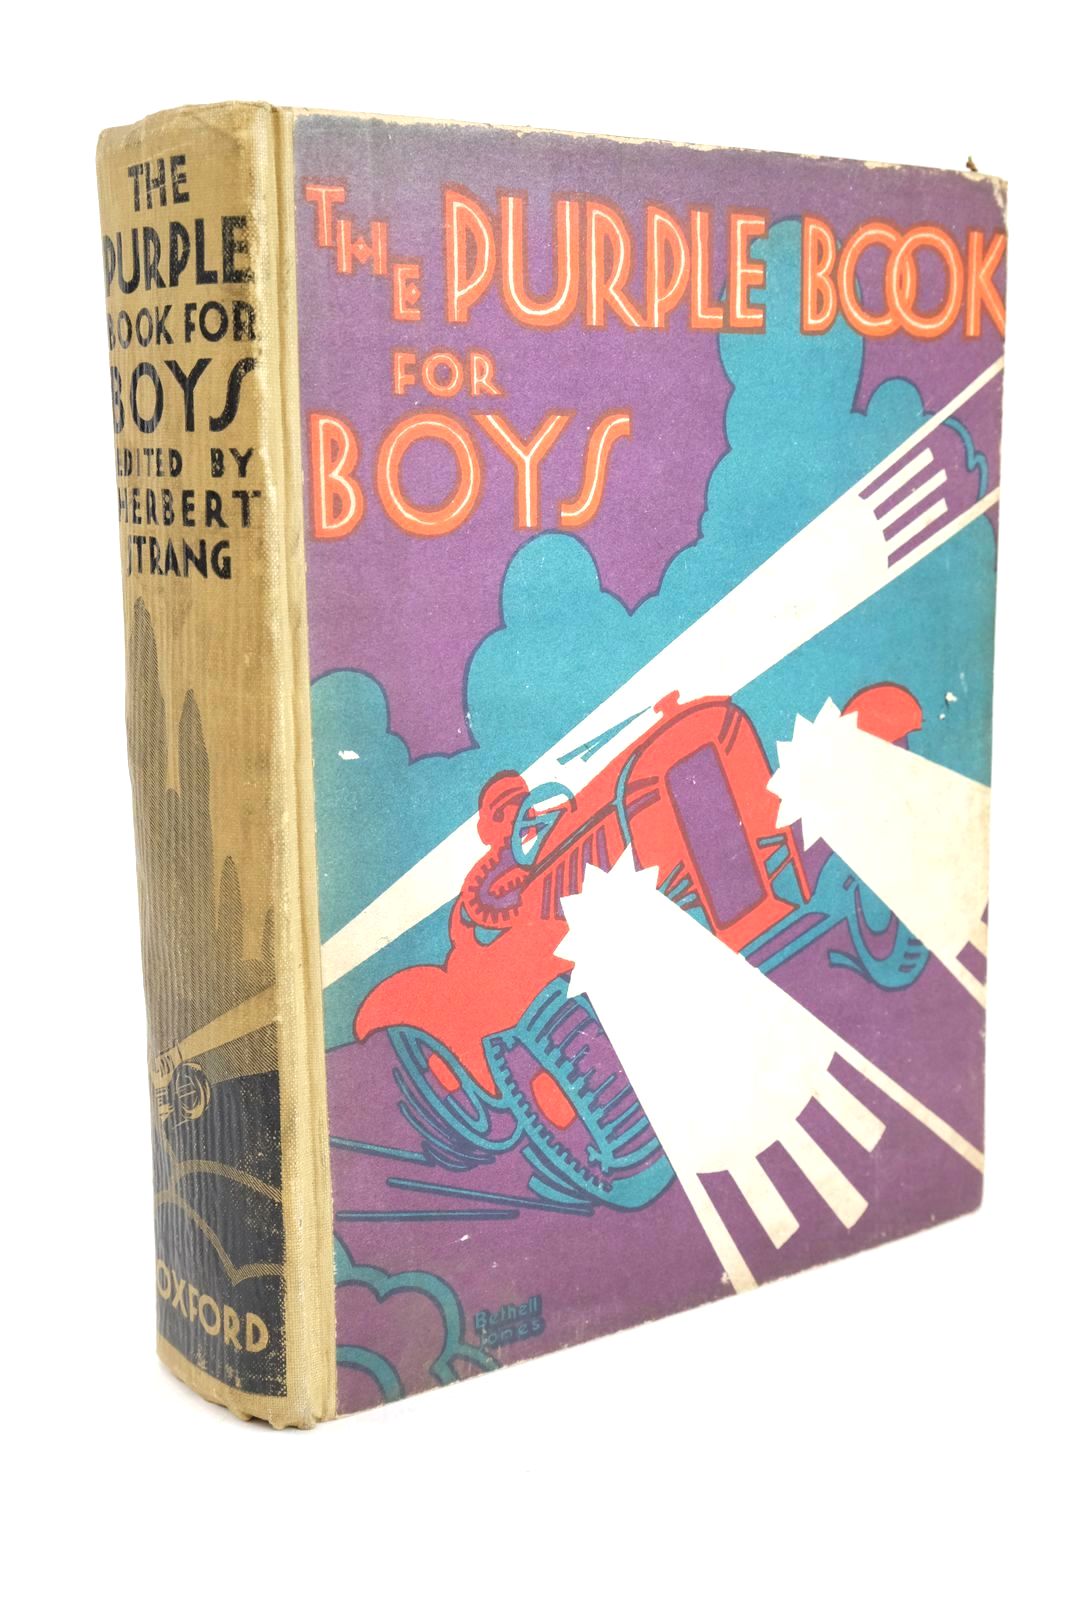 Photo of THE PURPLE BOOK FOR BOYS written by Strang, Herbert Lusignan, G. Gilson, Captain Charles et al,  illustrated by Robinson, Gordon Somerfield, Thomas Brock, H.M. et al.,  published by Oxford University Press, Humphrey Milford (STOCK CODE: 1325452)  for sale by Stella & Rose's Books